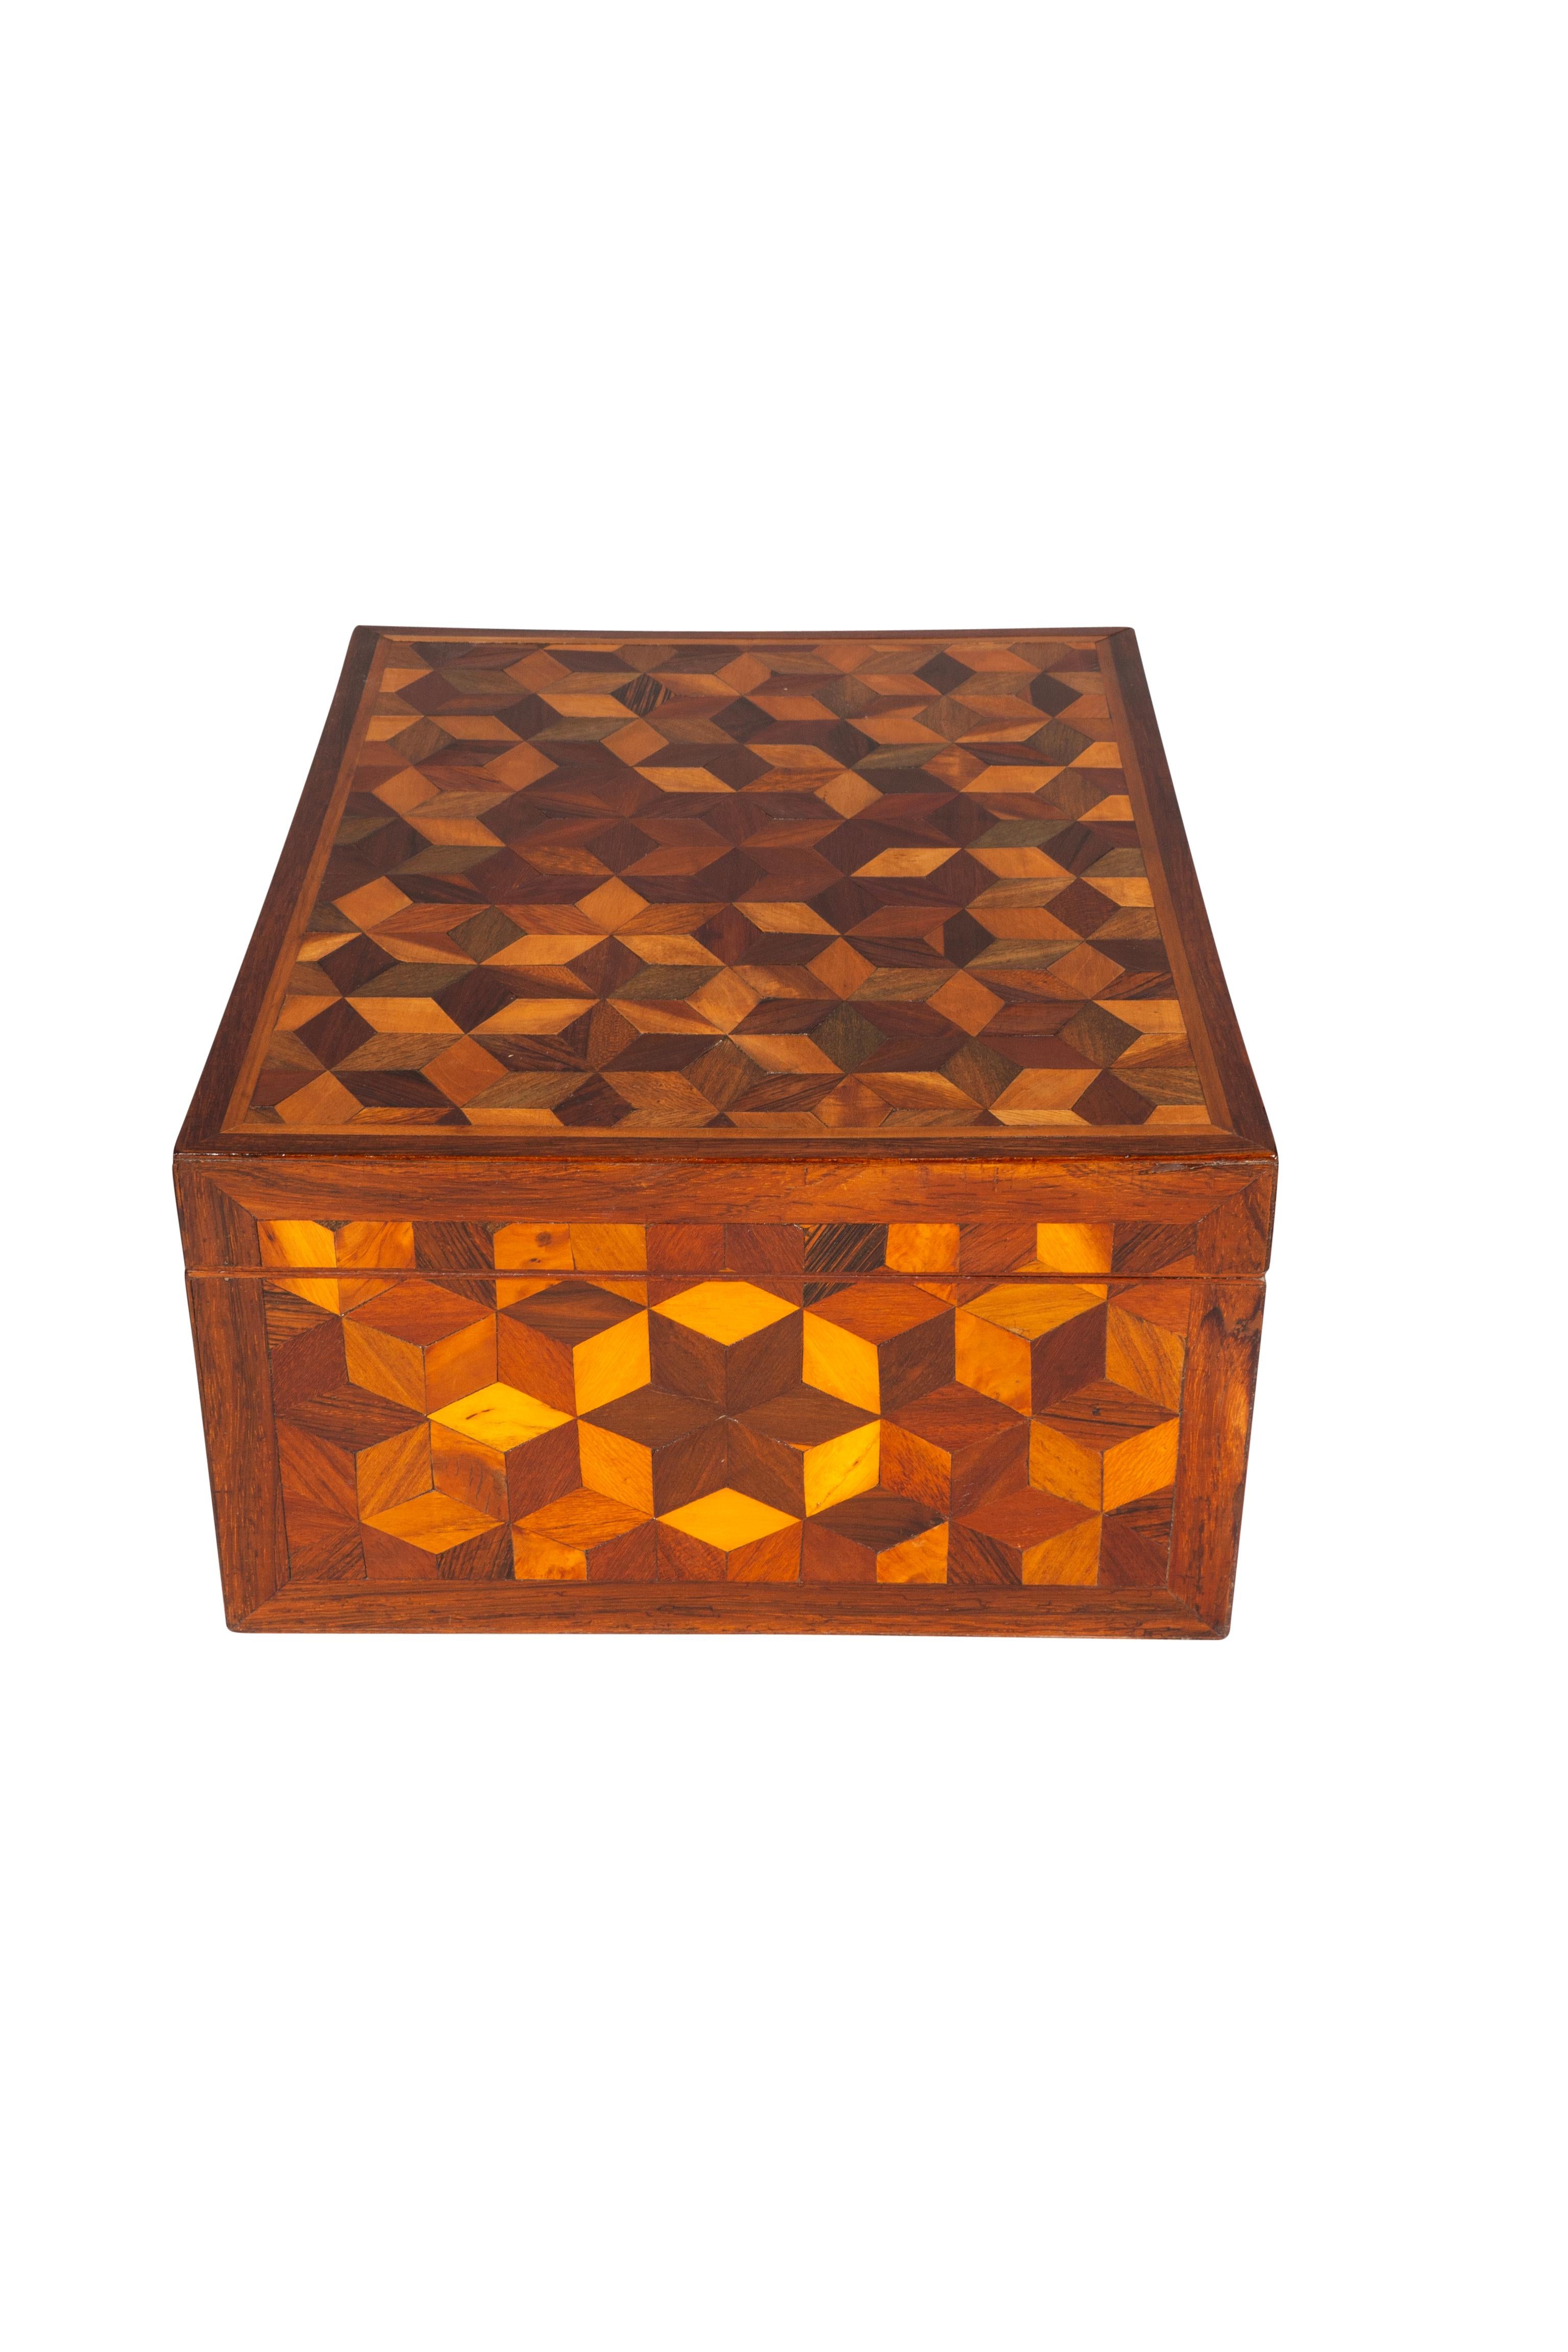 Boxwood Regency Parquetry Box For Sale